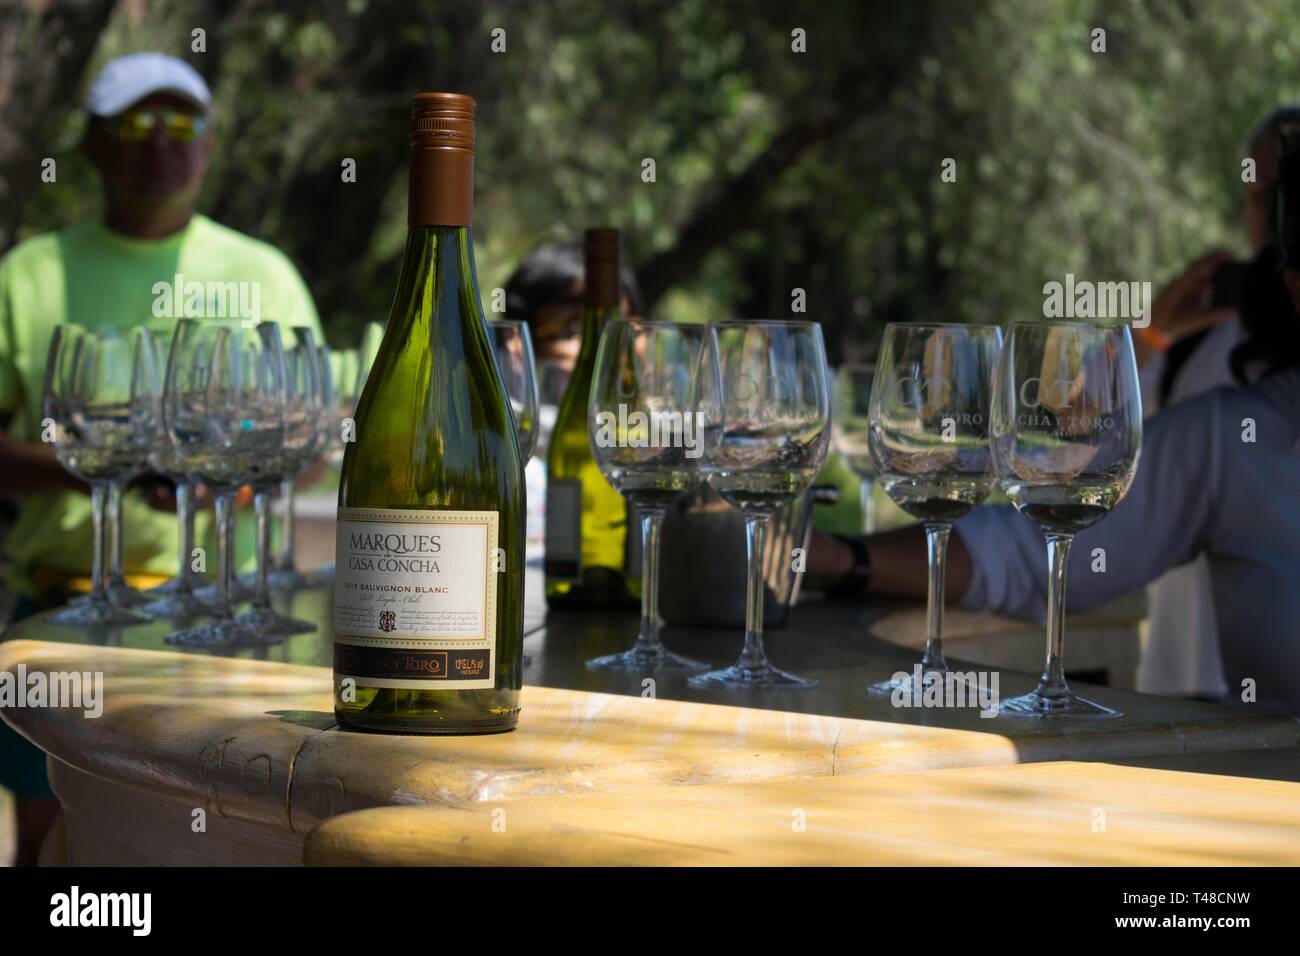 SANTIAGO, CHILE - Apr 06, 2019: Bottle of Concha y Toro brand white wine, placed on a table next to some glasses in a wine tasting Stock Photo